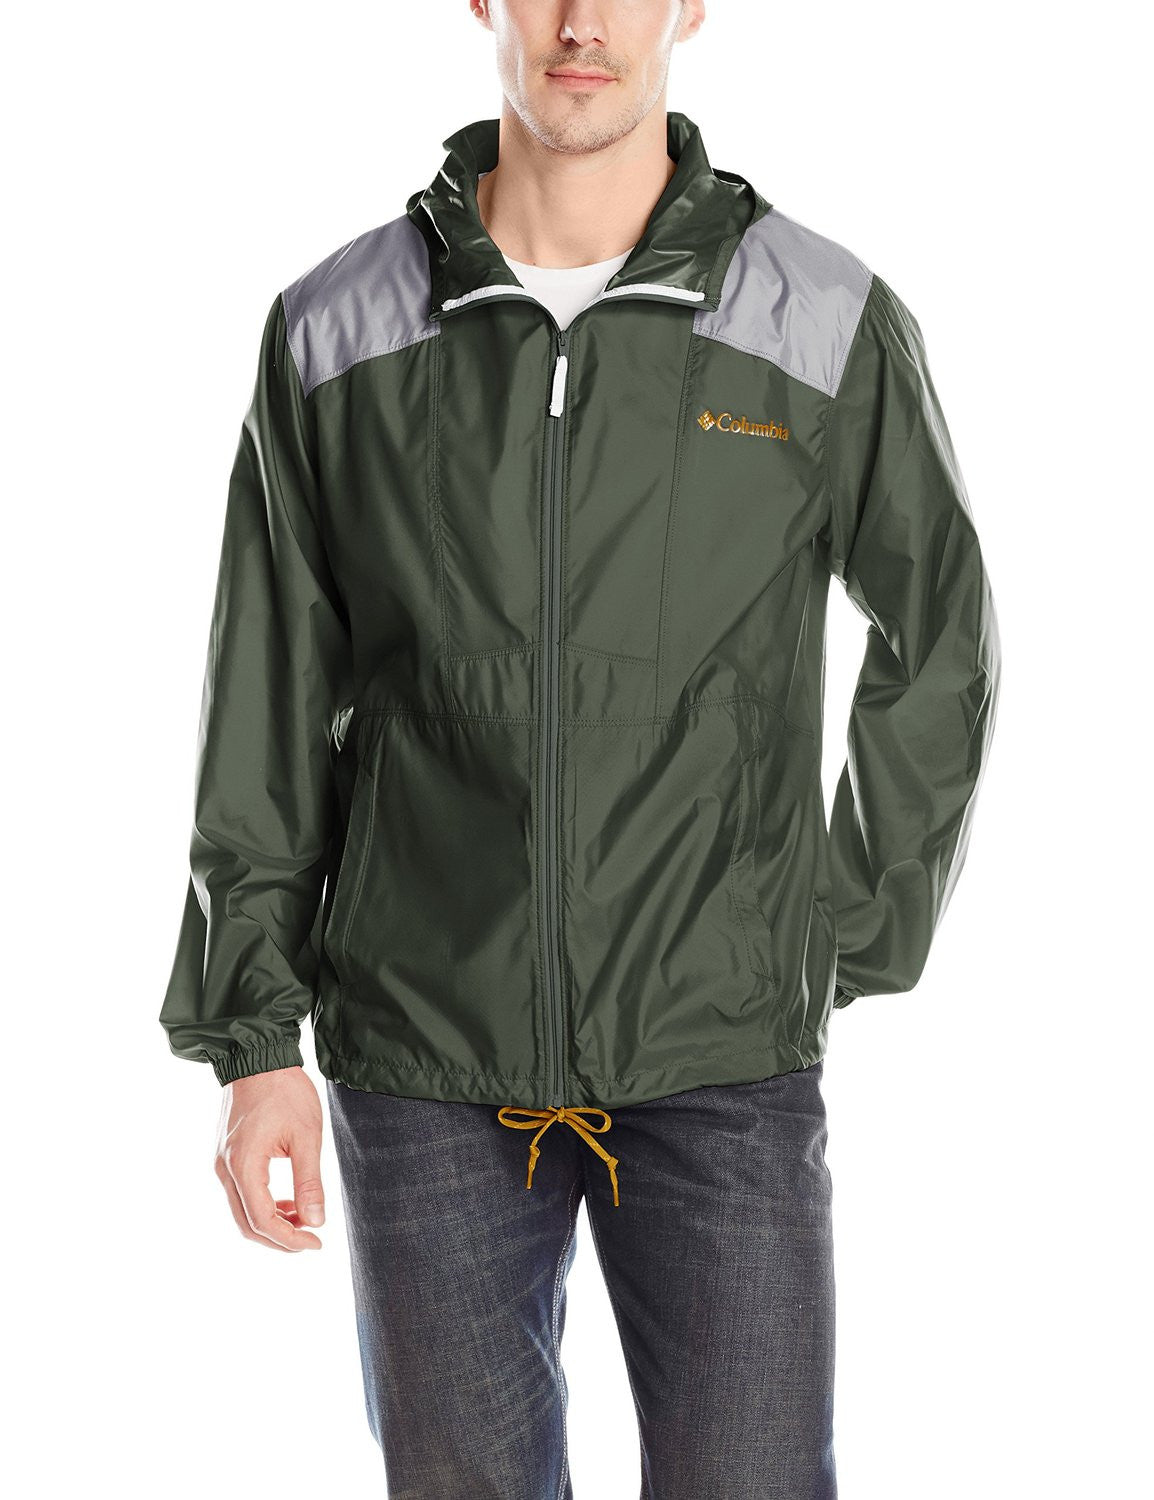  Columbia Sportswear Men's Go To Jacket, Black, Small : Clothing,  Shoes & Jewelry